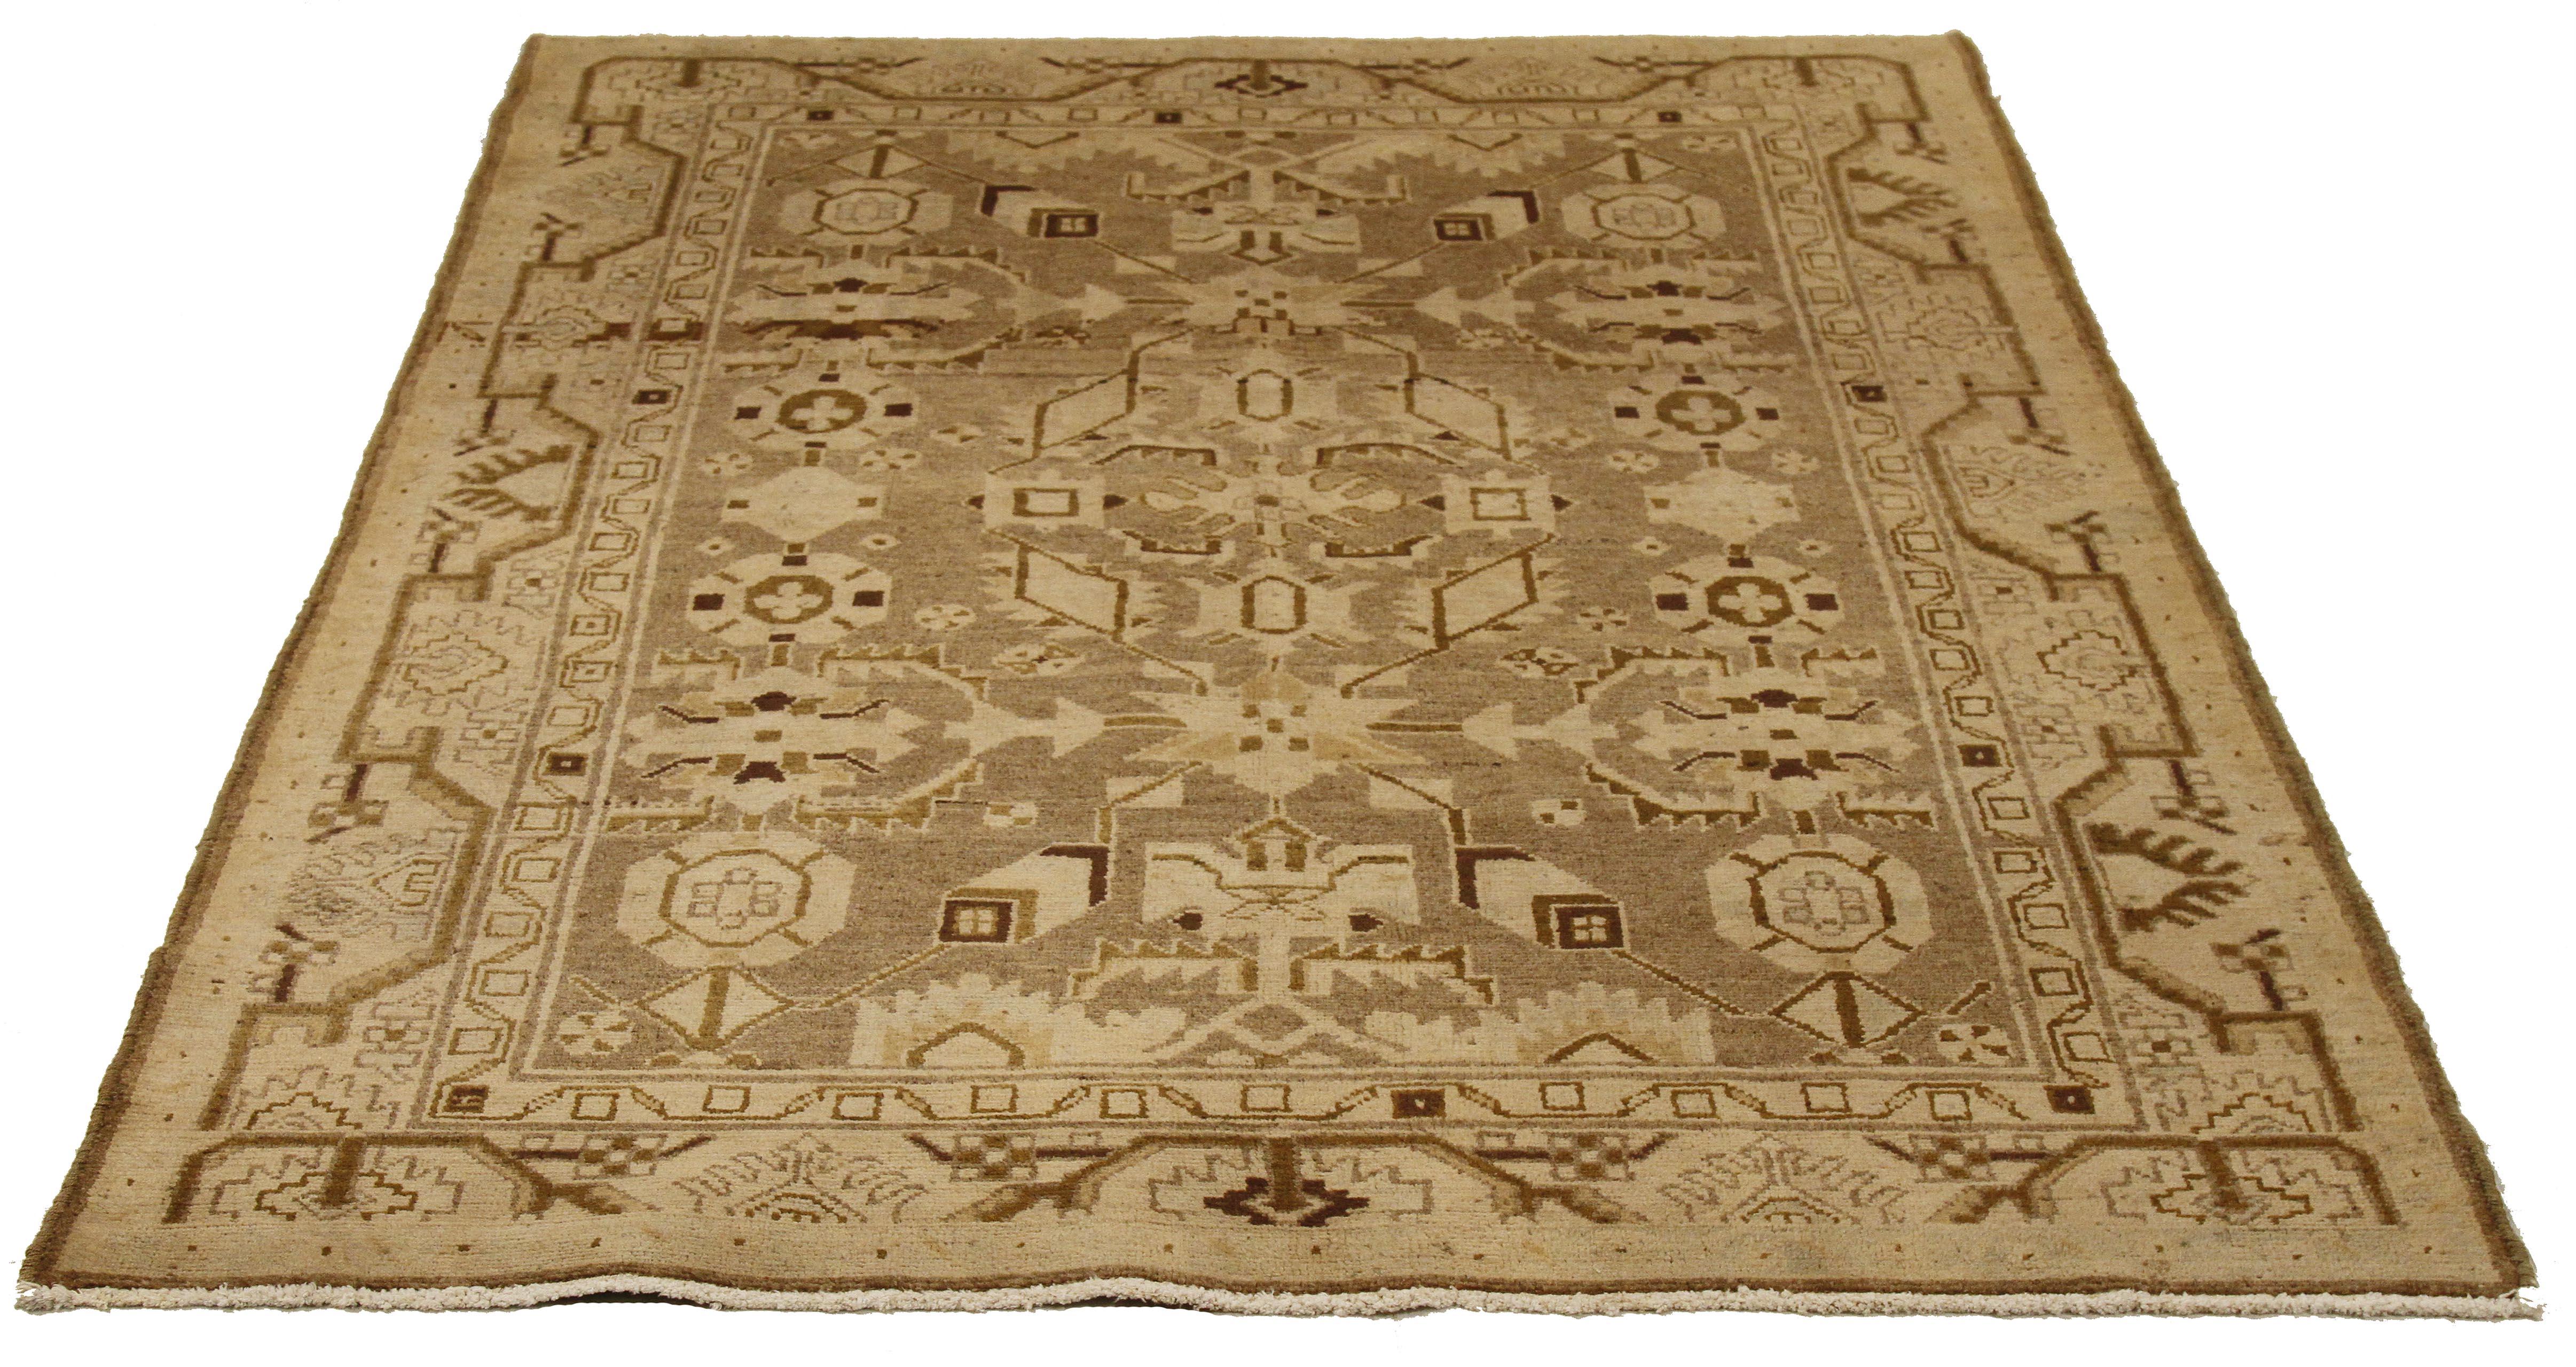 Antique Persian runner rug handwoven from the finest sheep’s wool and colored with all-natural vegetable dyes that are safe for humans and pets. It’s a traditional Malayer design featuring brown and beige tribal details over an ivory field. It’s a